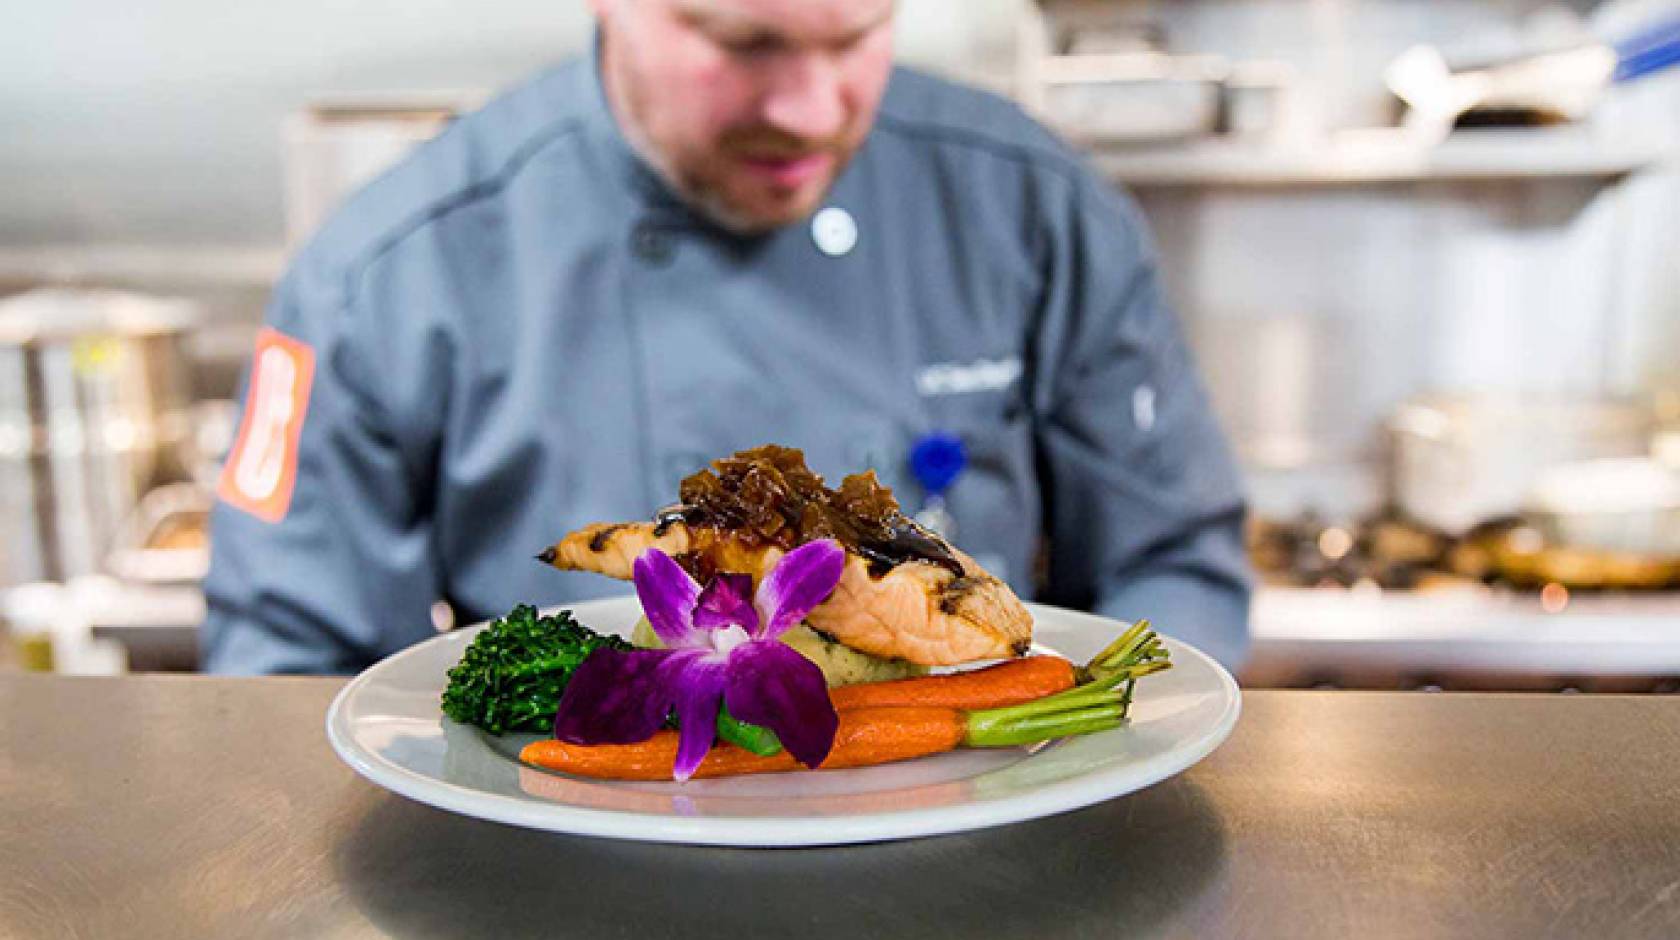 Executive Chef Rodney Fry prepares beautiful, healthy meals in the newly renovated kitchen at UC San Diego's Thornton Hospital.